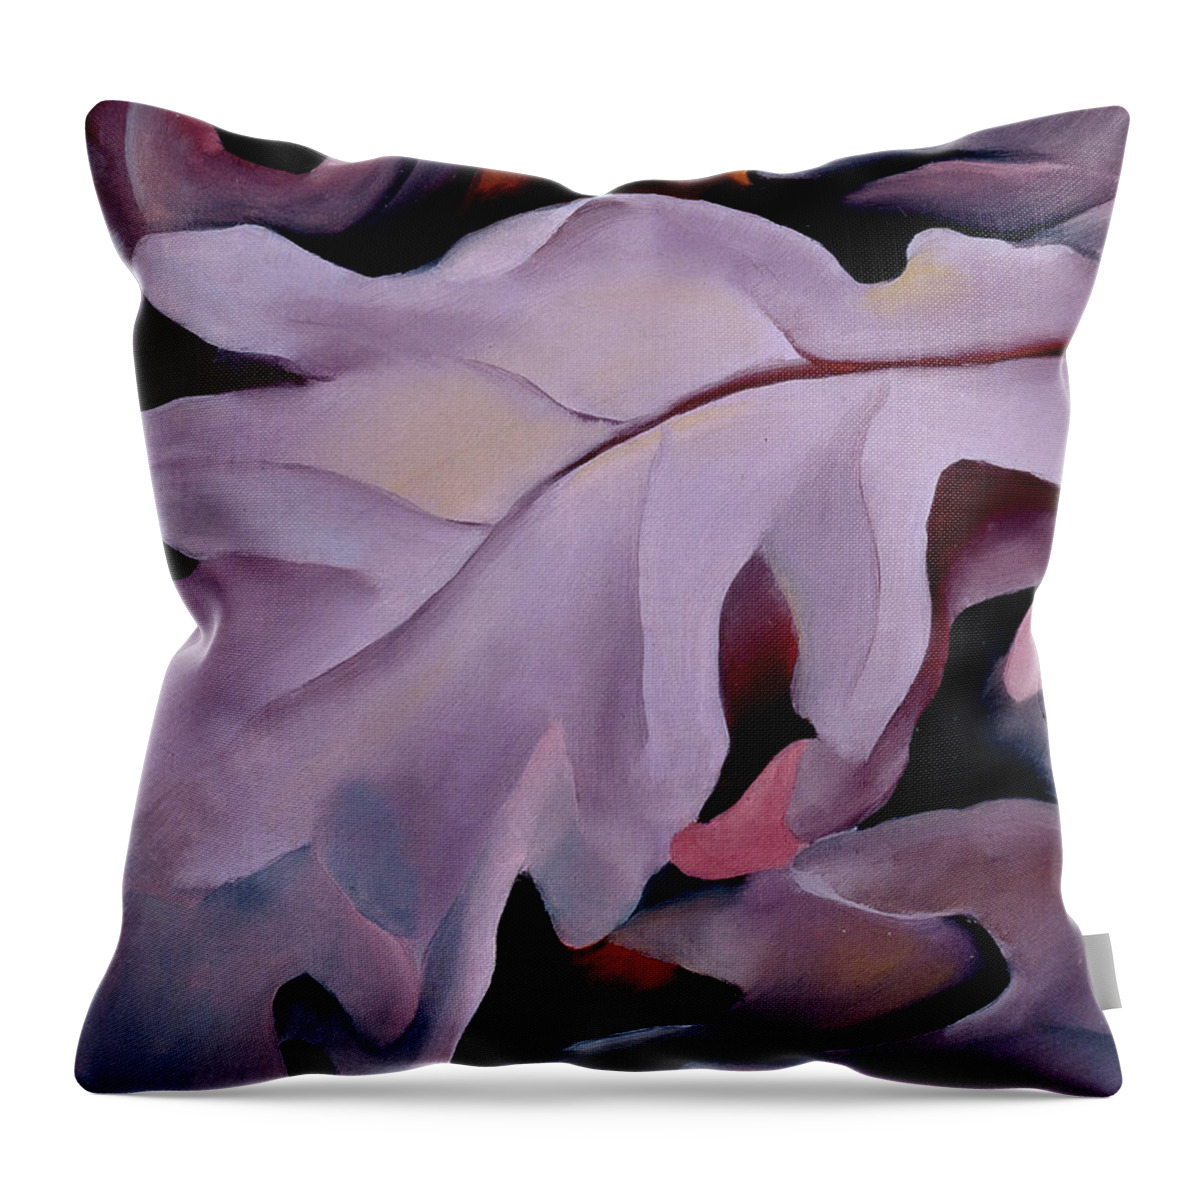 Georgia O'keeffe Throw Pillow featuring the painting Purple leaves - Abstract modernist nature painting by Georgia O'Keeffe